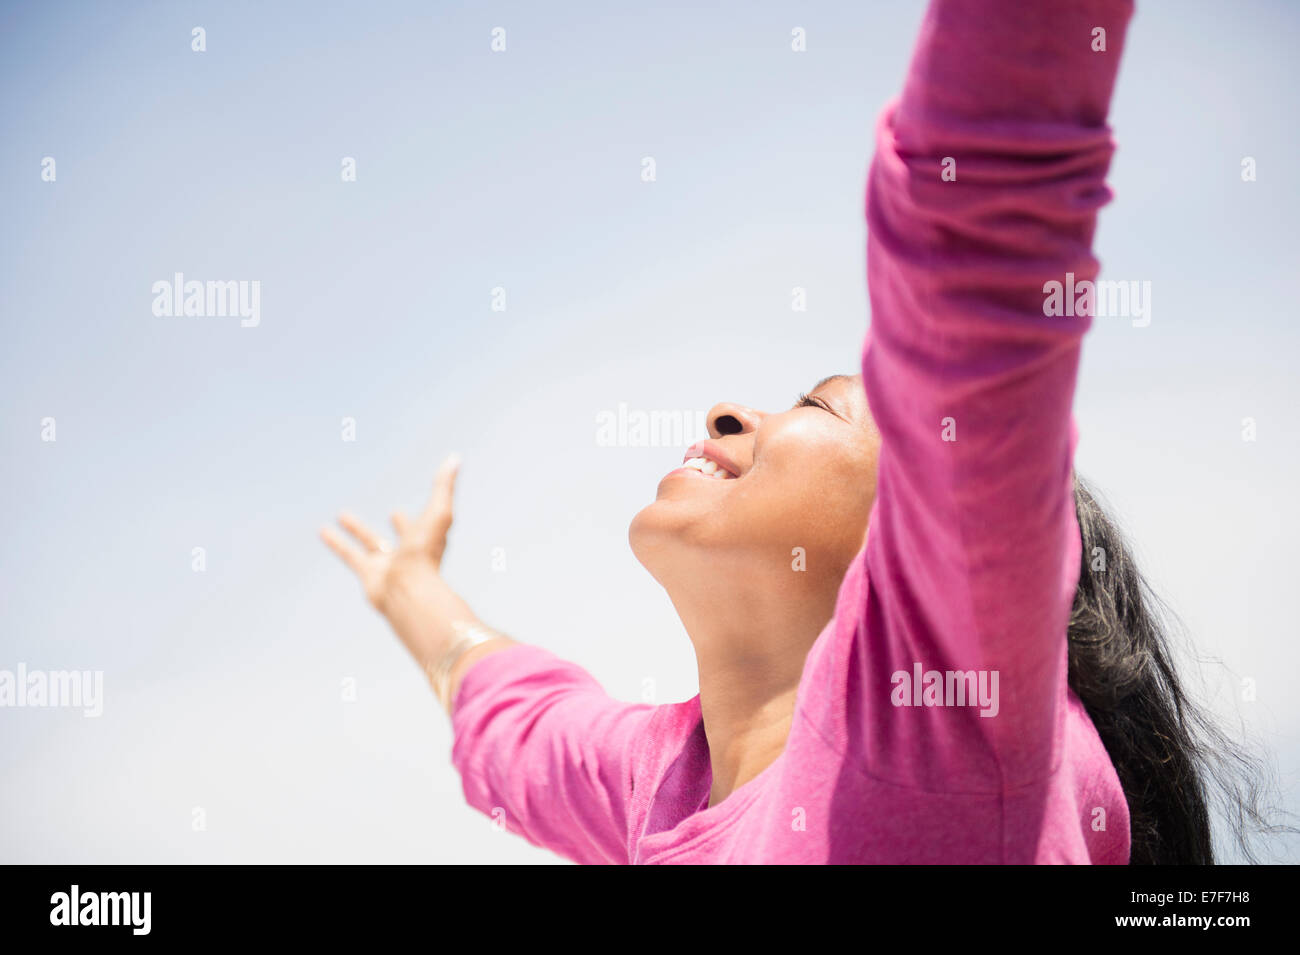 Mixed Race woman with arms outstretched outdoors Banque D'Images